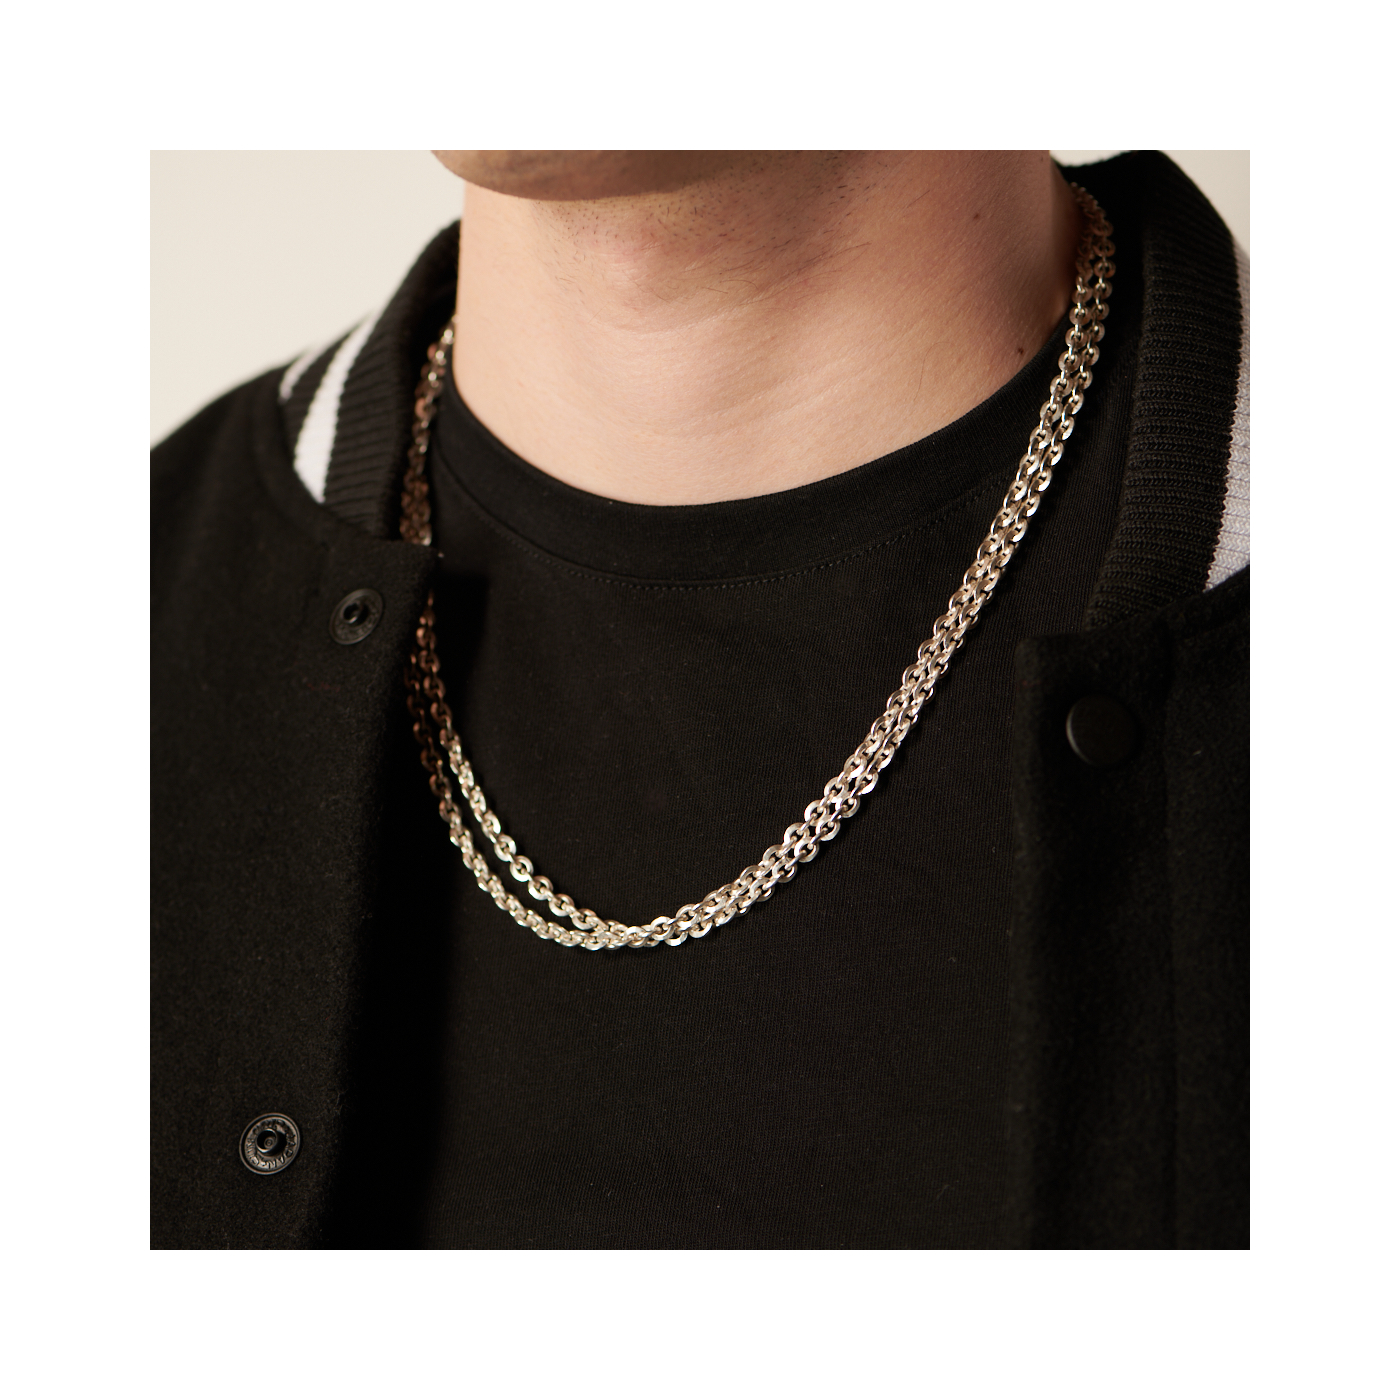 Mens Ice Chain for sale | eBay